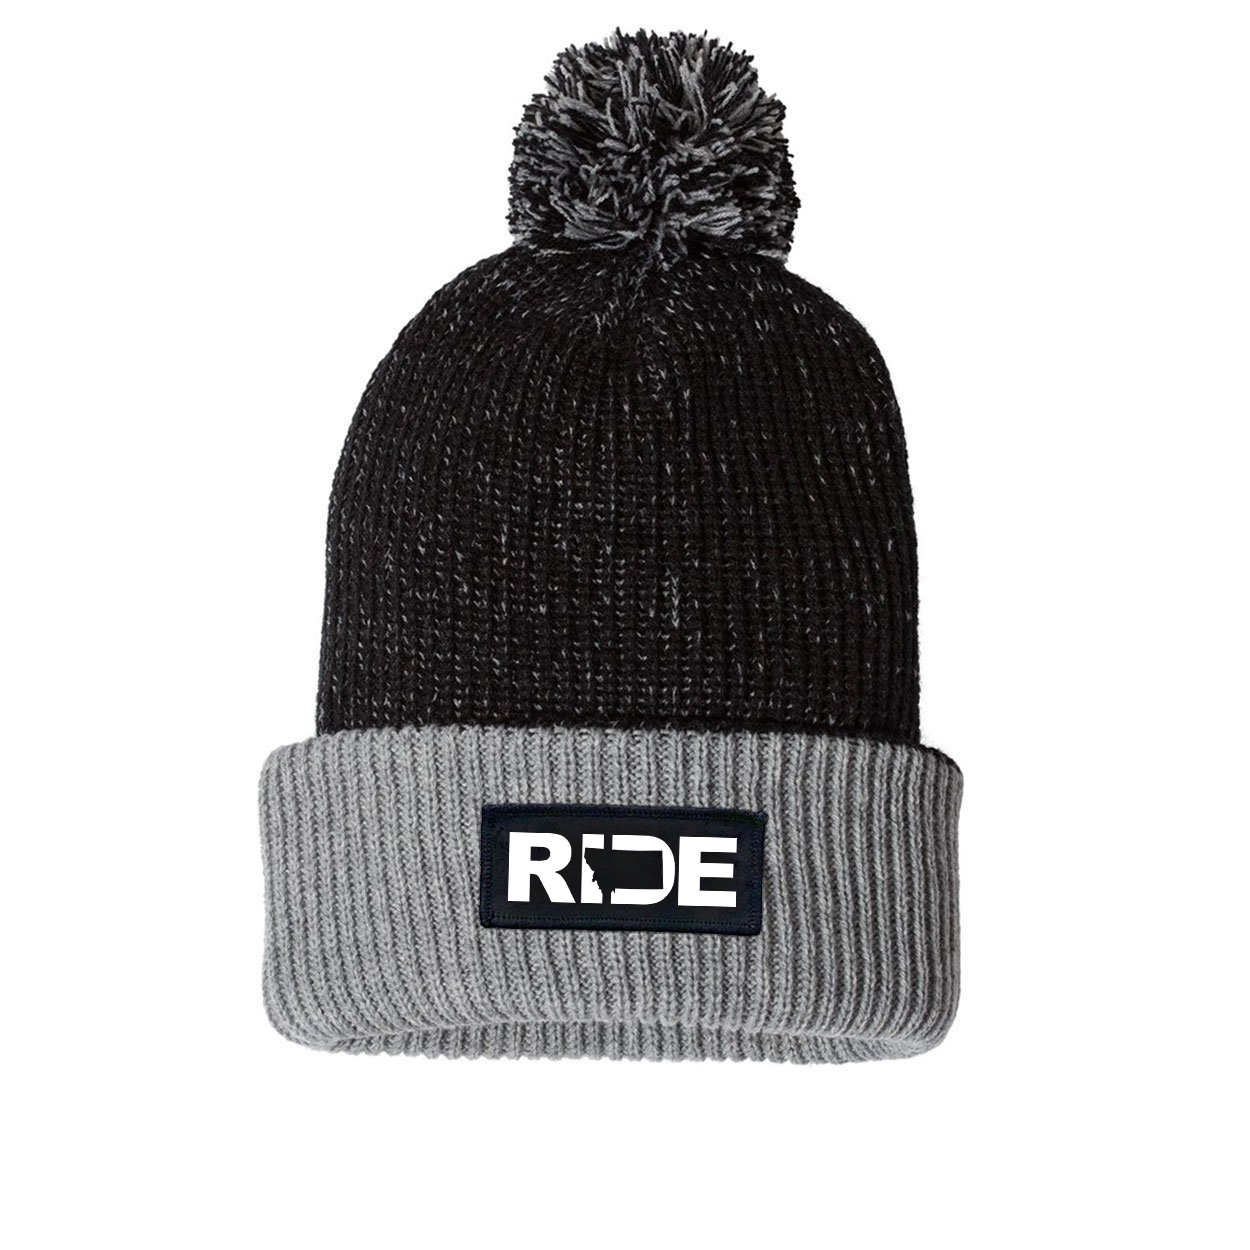 Ride Montana Night Out Woven Patch Roll Up Pom Knit Beanie Black/Gray (White Logo)